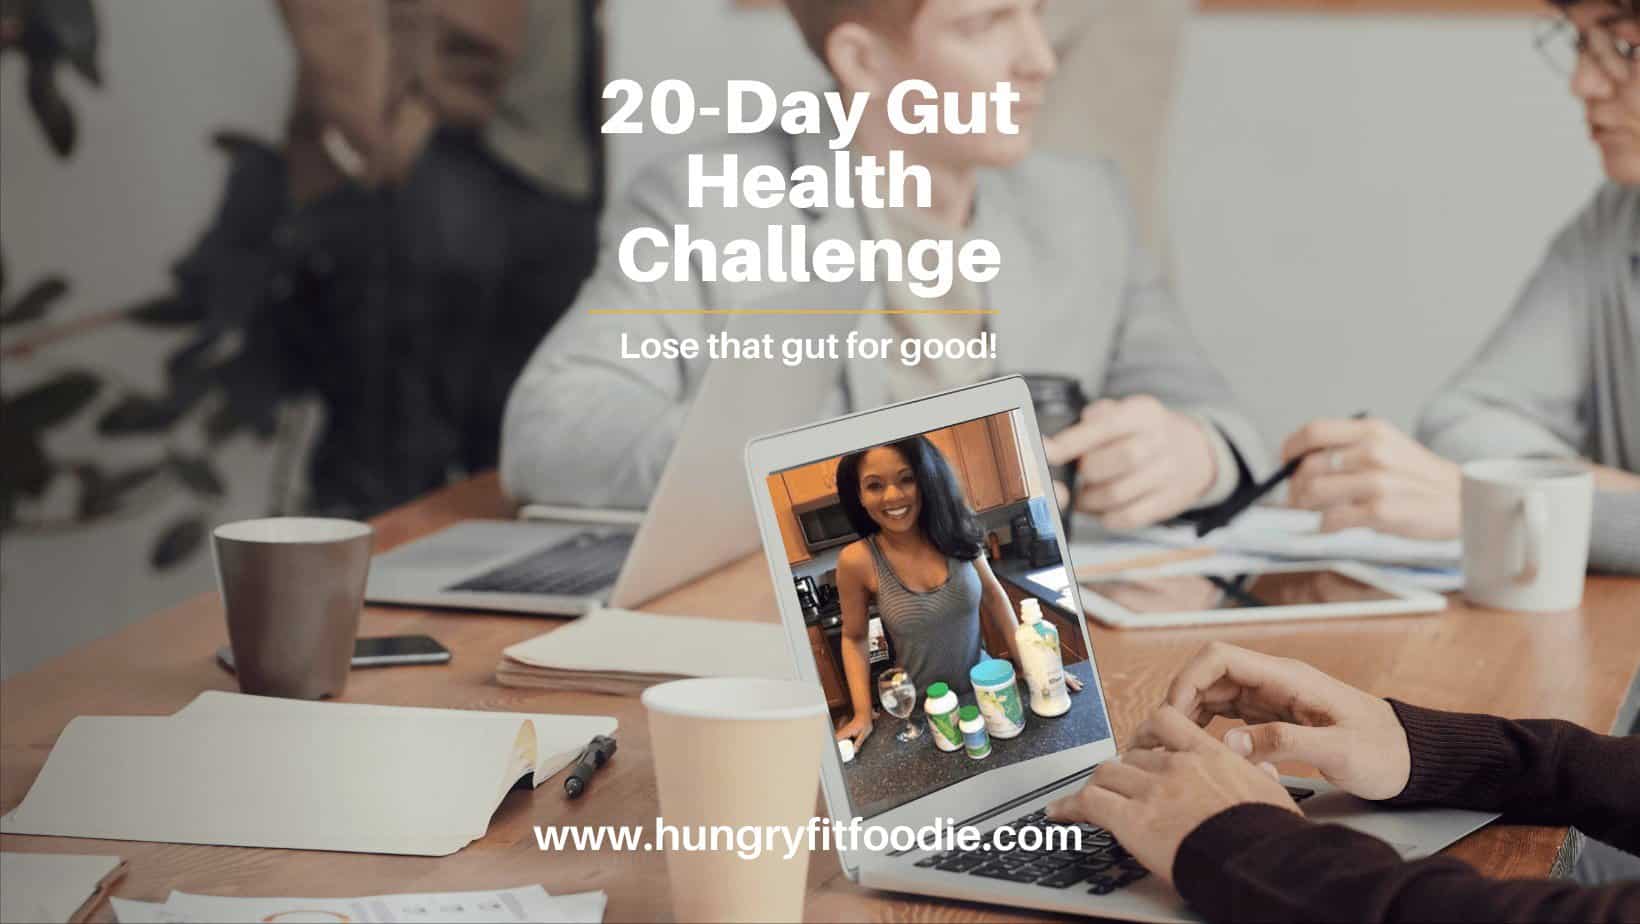 Hungry Fit Foodie Facebook Group Banner, with picture of creator and certified wellness coach, Erin Cooper